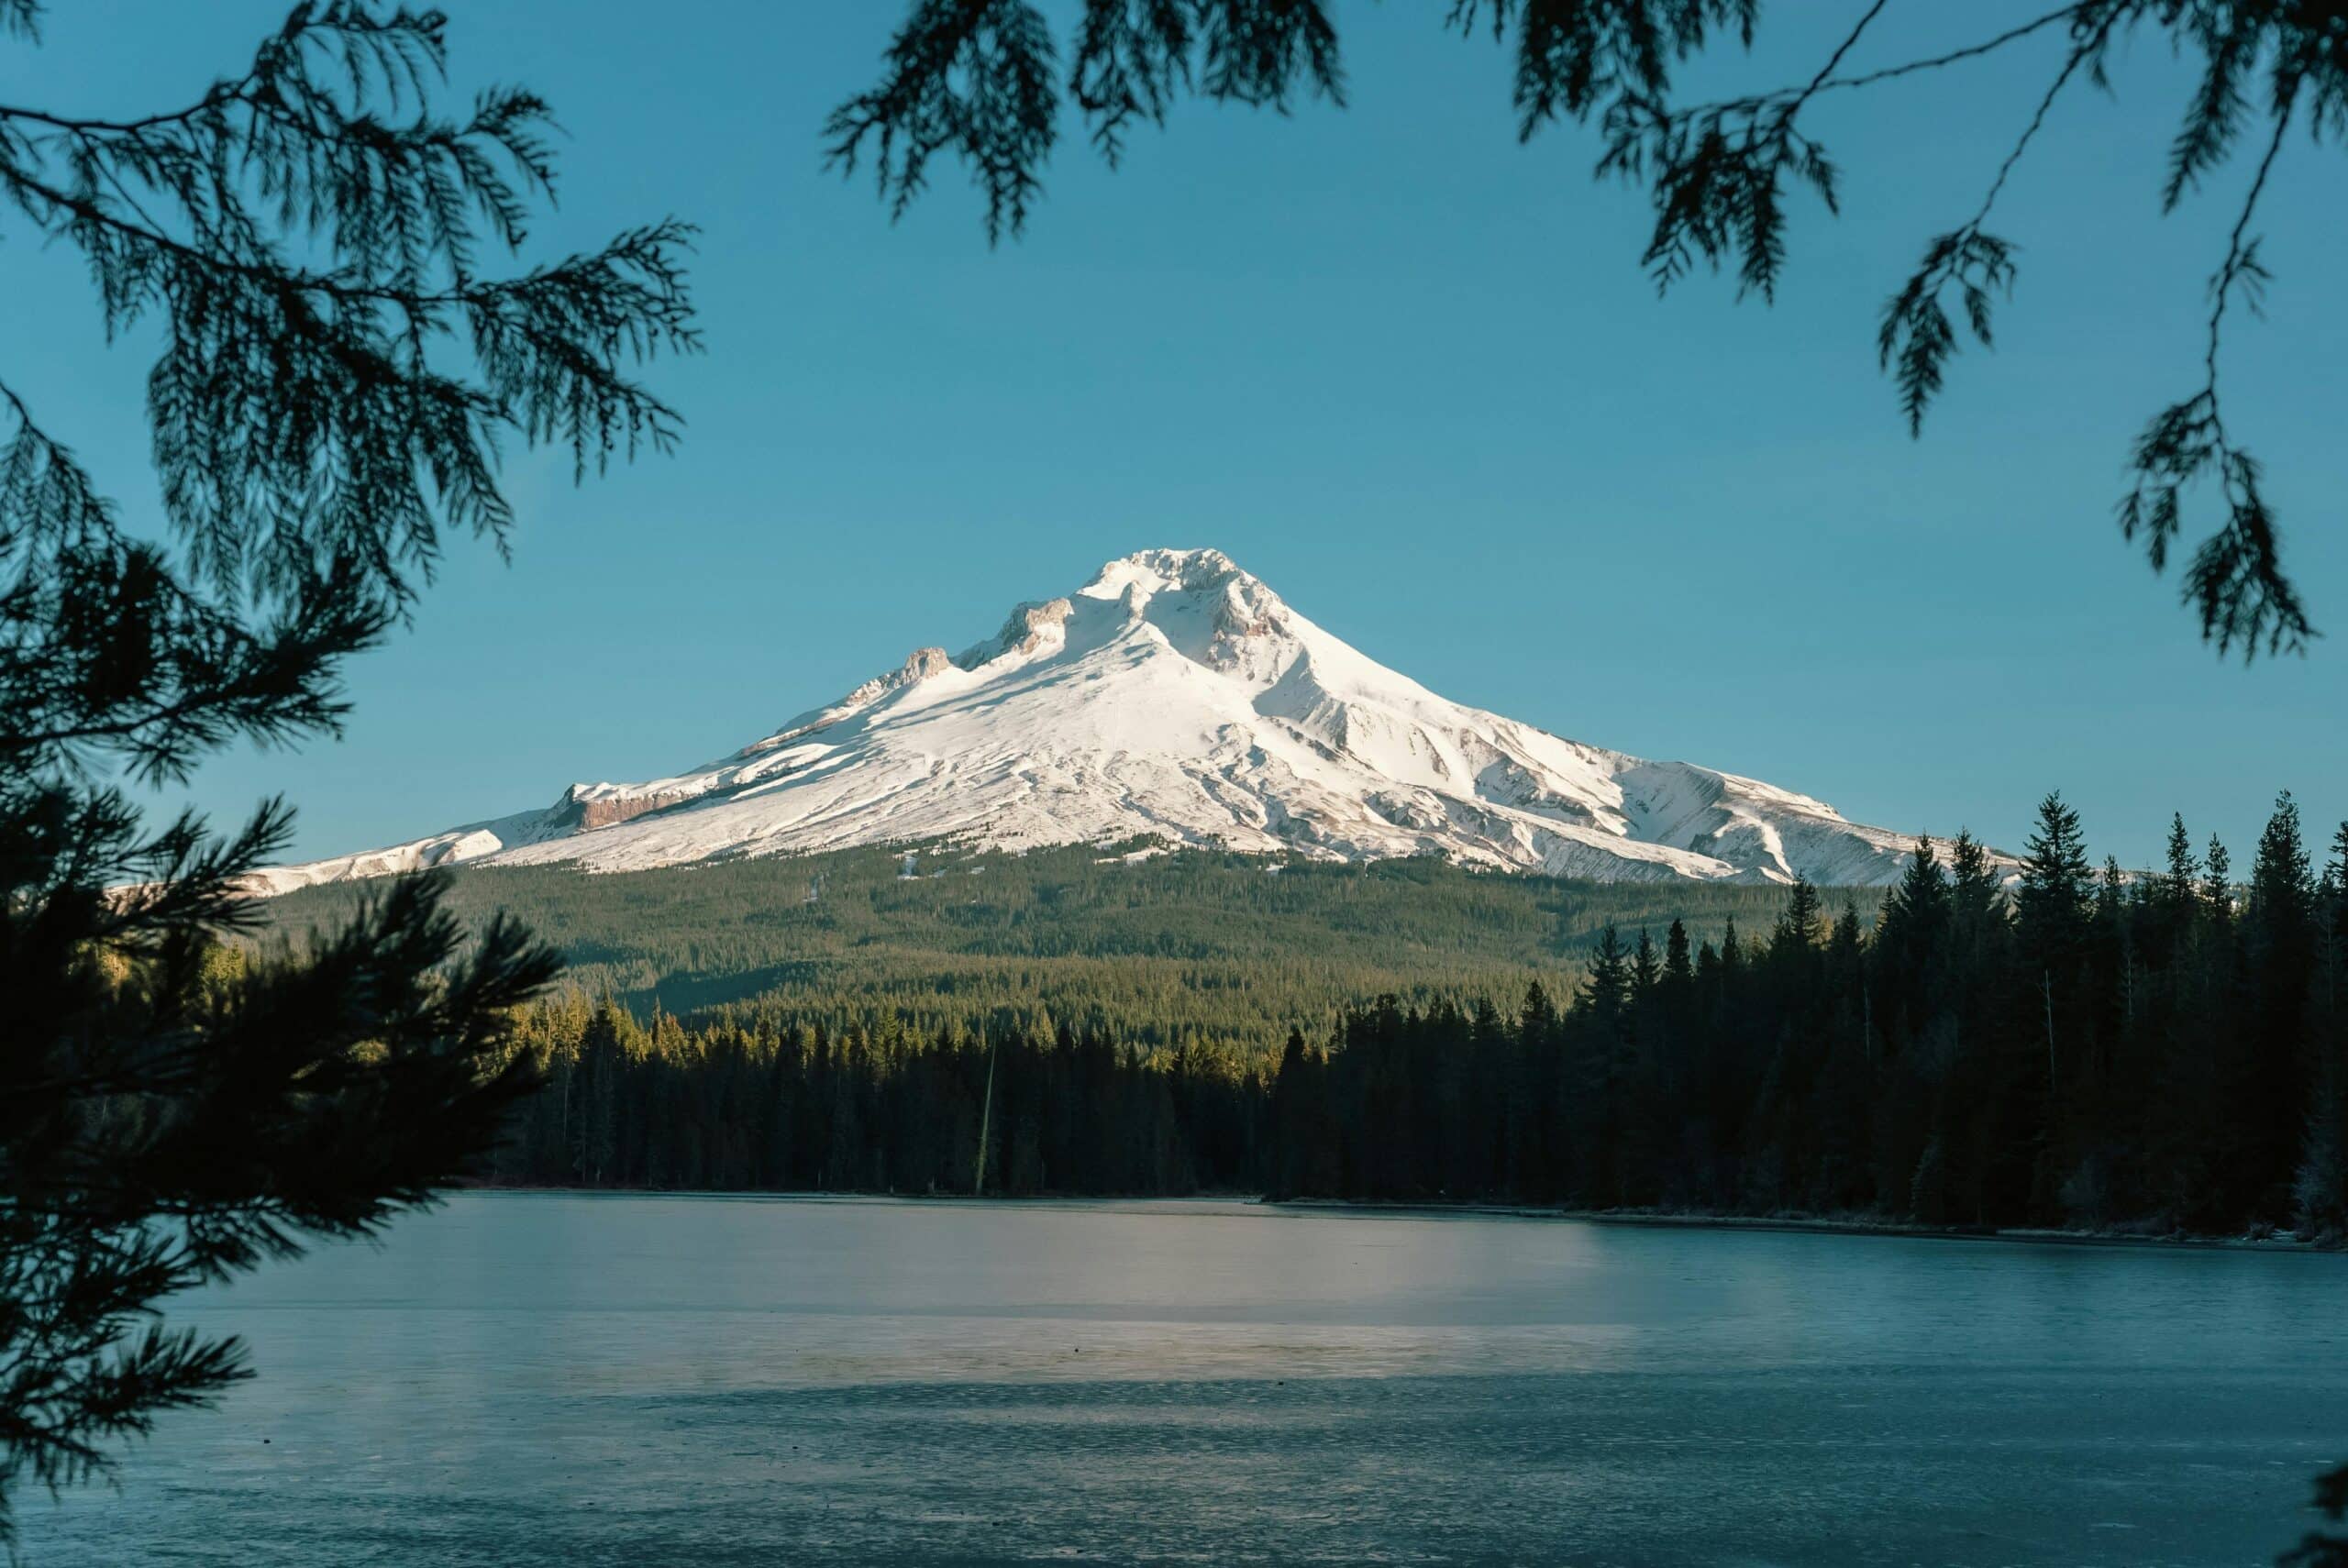 Mount Hood in Oregon is the perfect distance for a Portland of Seattle road trip.